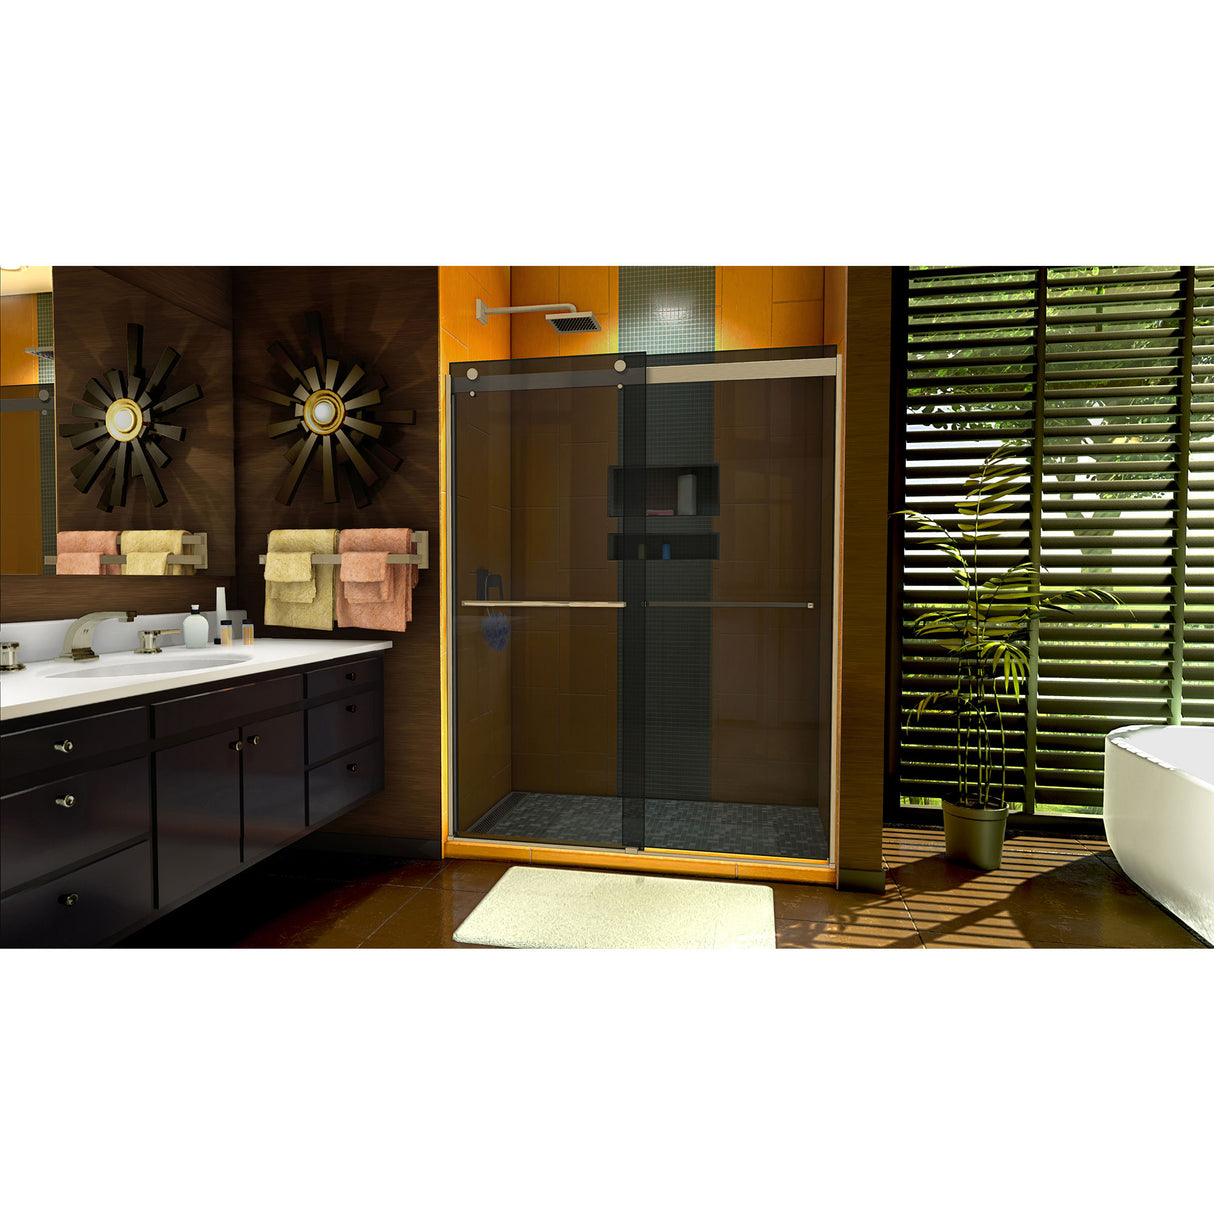 DreamLine Sapphire 56-60 in. W x 76 in. H Semi-Frameless Bypass Shower Door in Brushed Nickel and Gray Glass